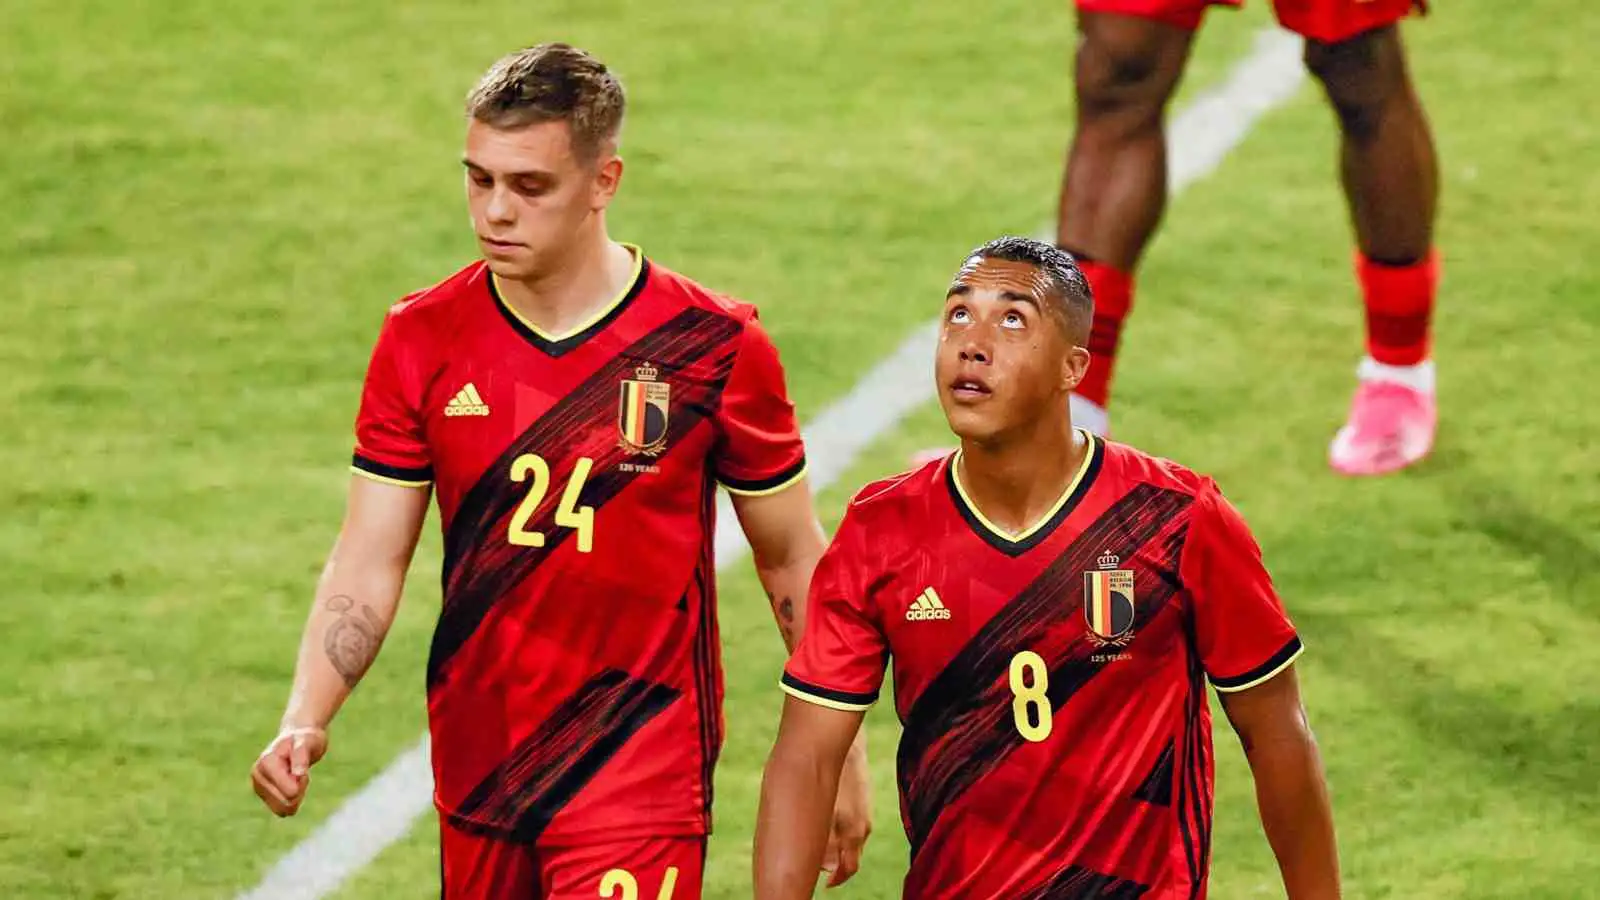 Leandro Trossard and Youri Tielemans after a Belgium match